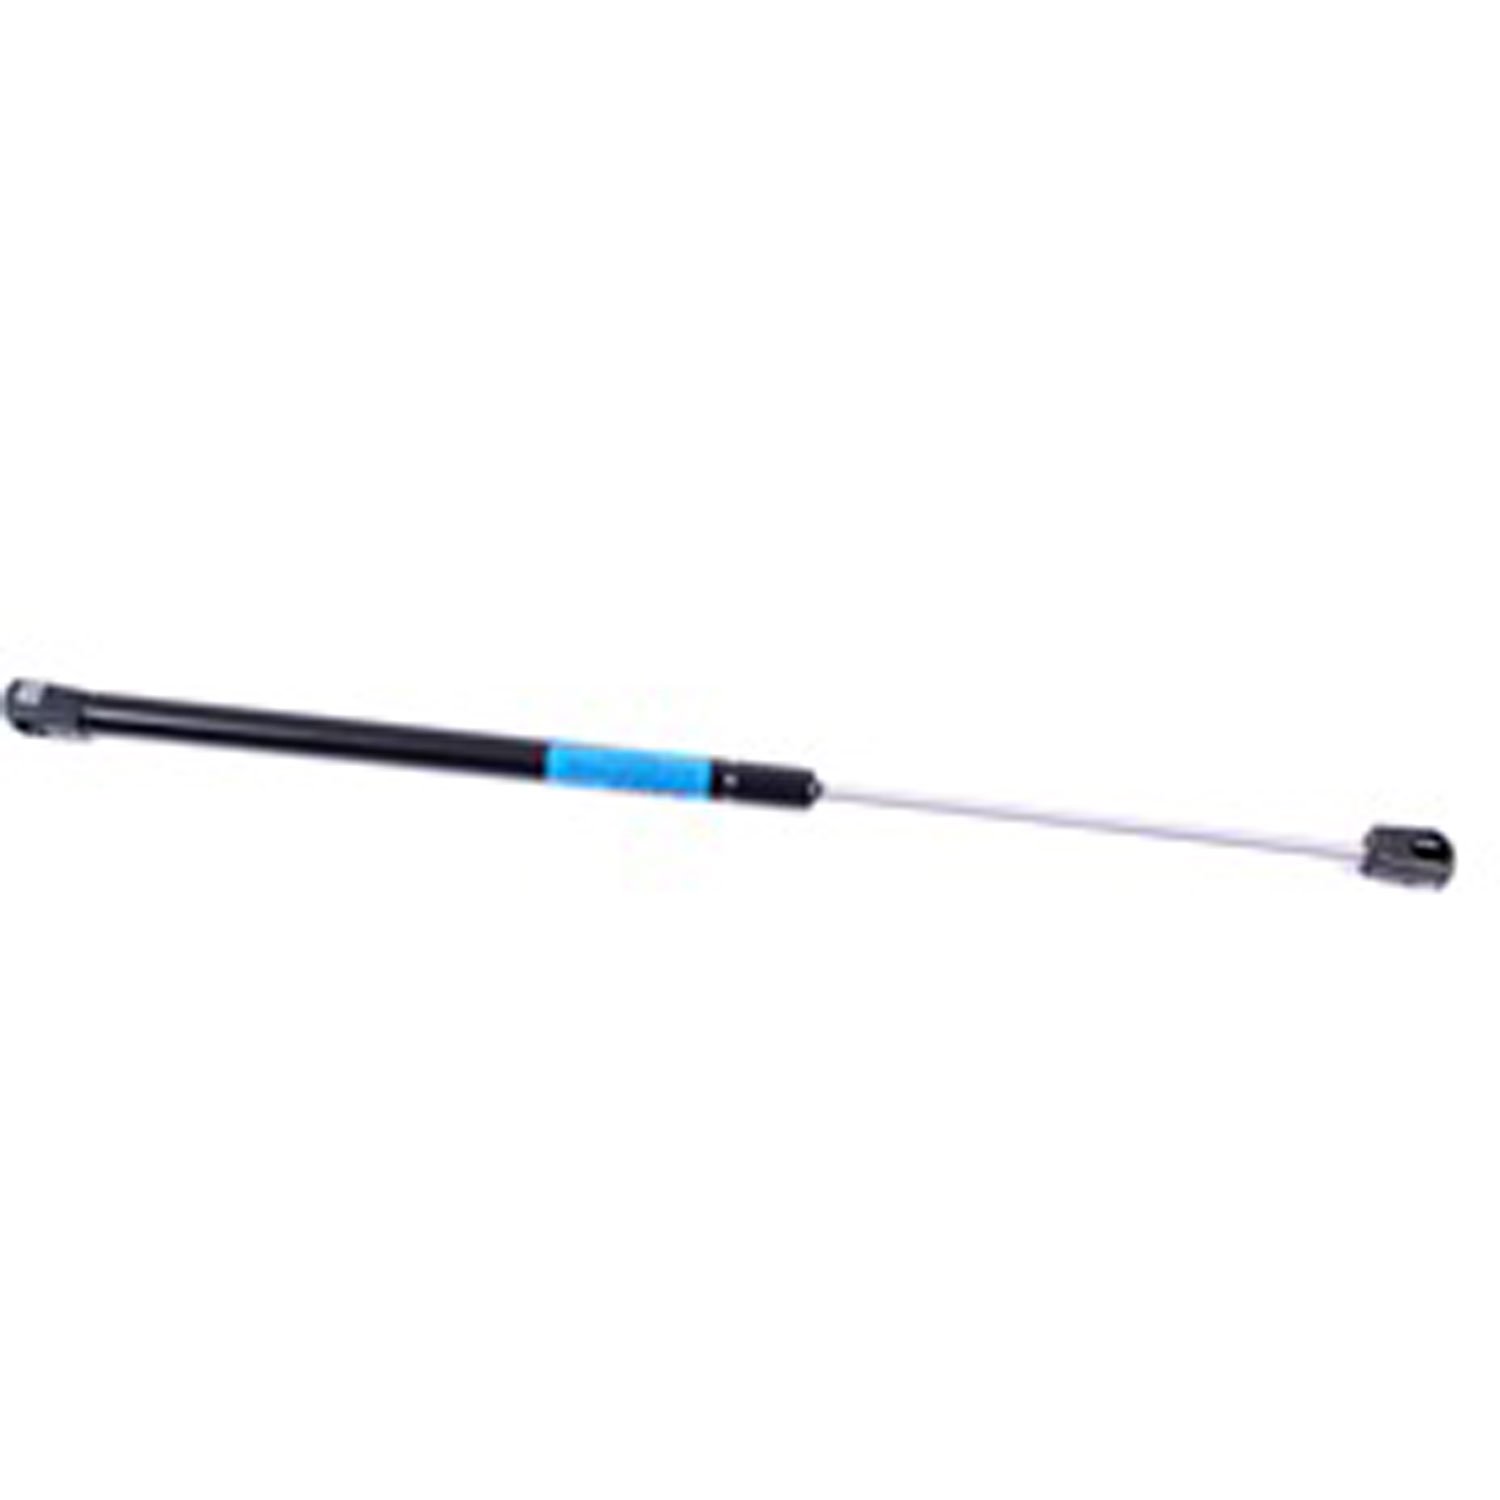 Replacement gas strut from Omix-ADA, Fits liftgate on 02-07 Jeep Liberty KJ Will fit left or right side.